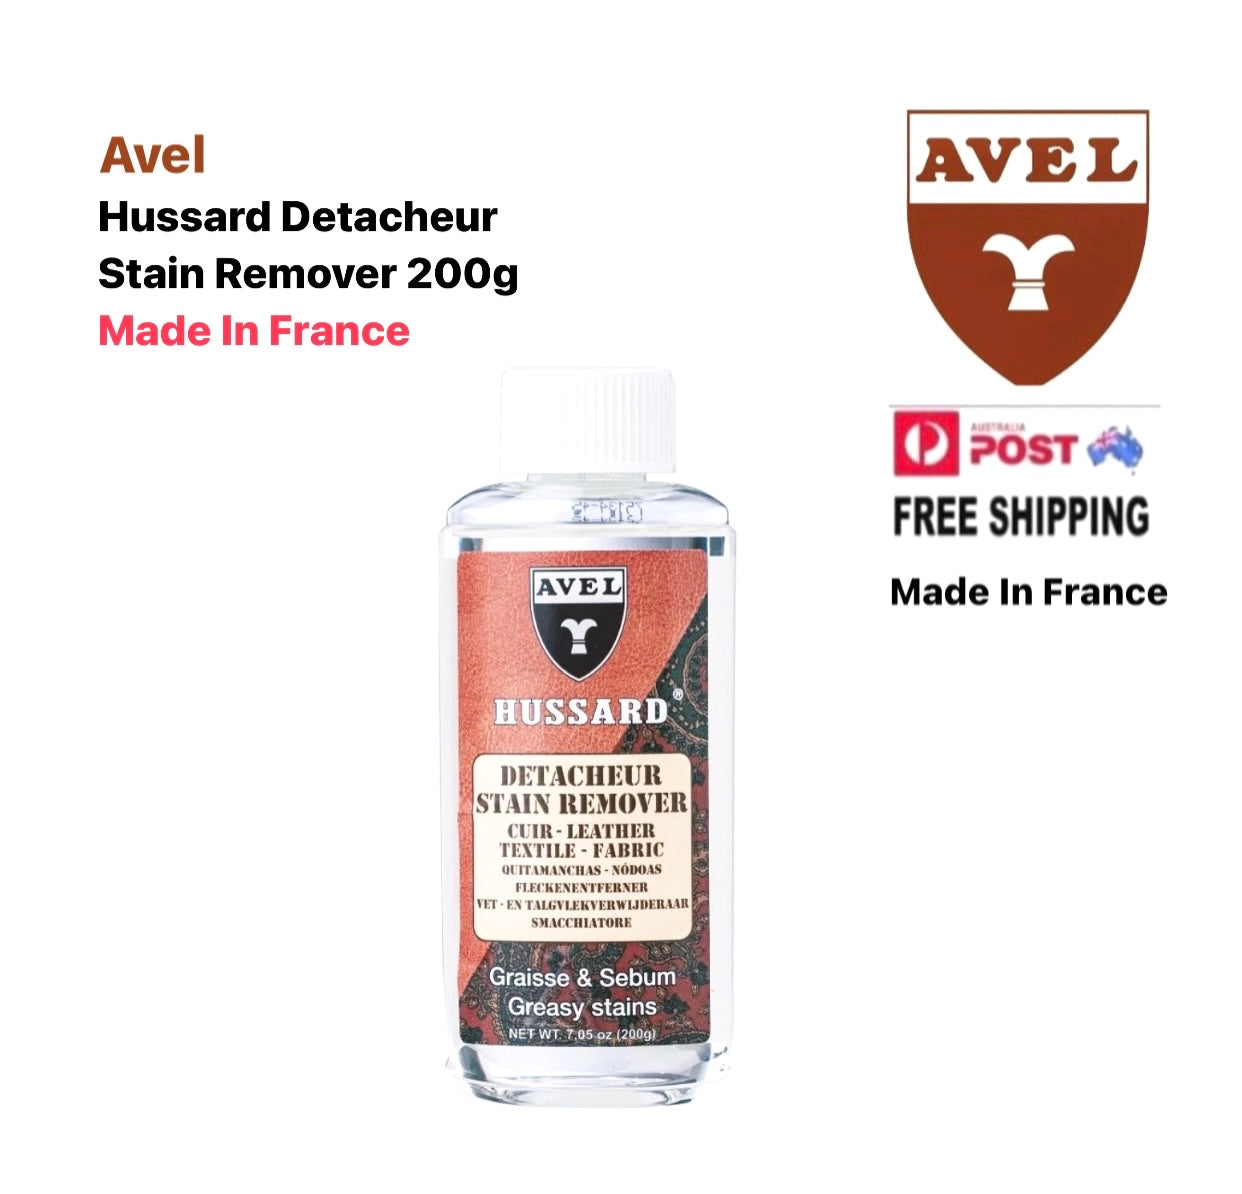 Avel Hussard Detacheur Stain Remover Leather Textile Fabric 200g Made In France